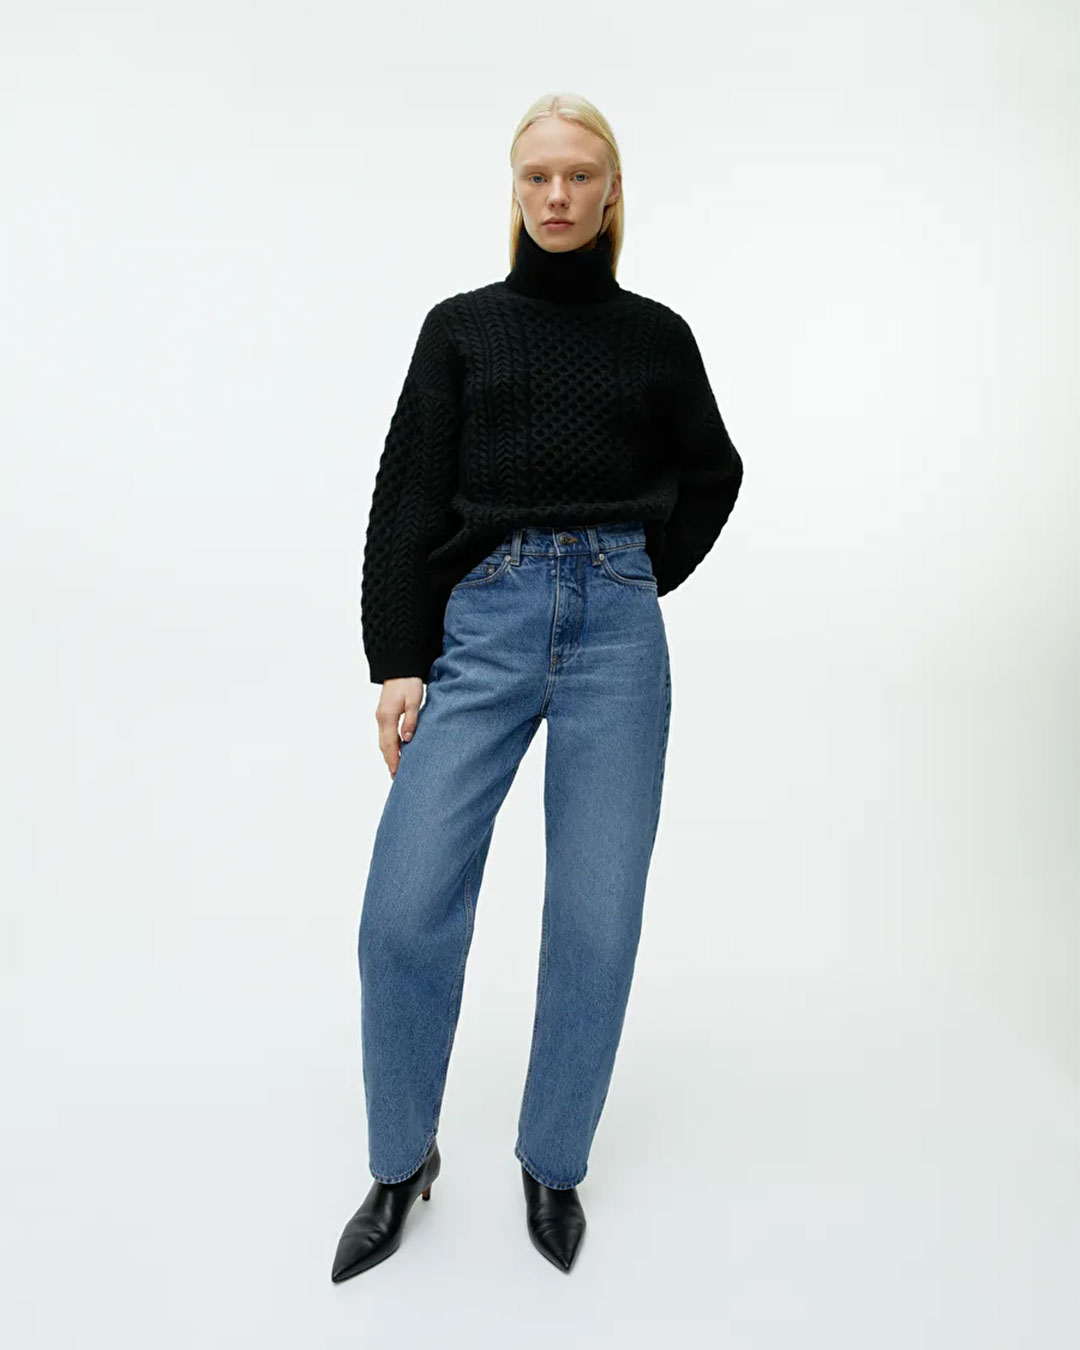 Barrel Jeans Are Trending For 2023, Here Are 14 Pairs To Consider ...